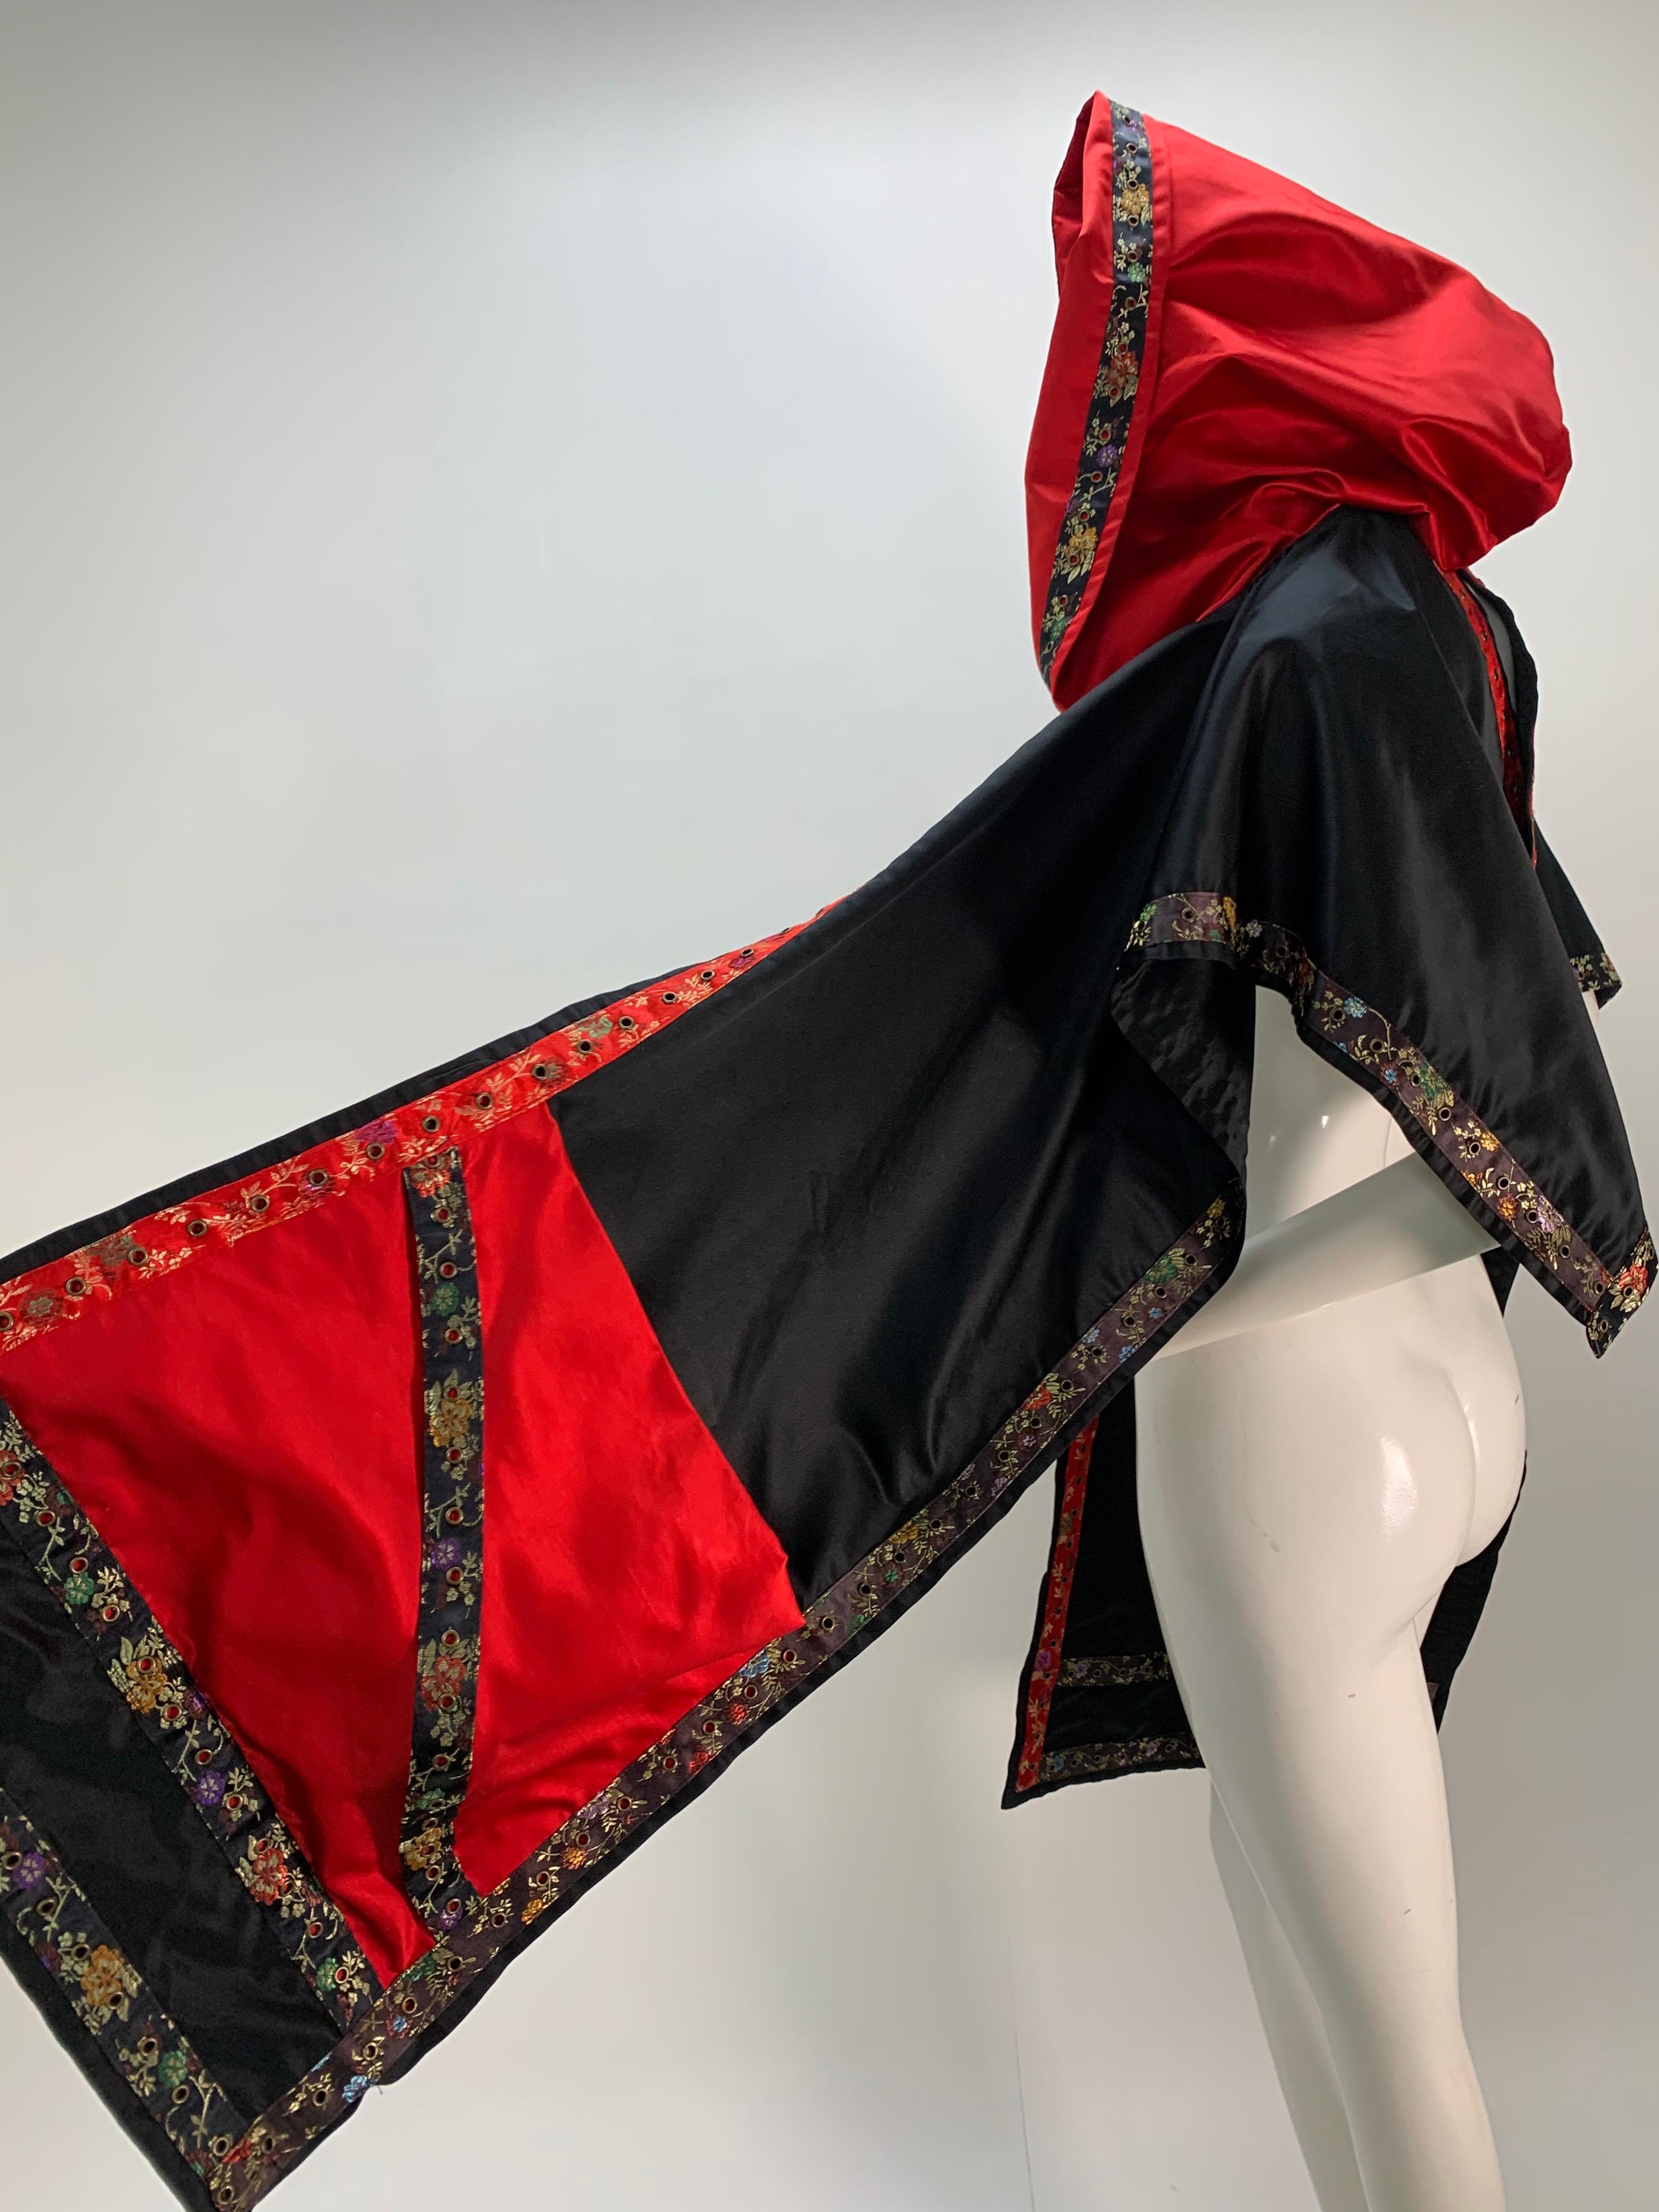 Torso Creations Black & Red Silk Satin Hooded Wrap Stole Trimmed In Brocade Tape For Sale 4